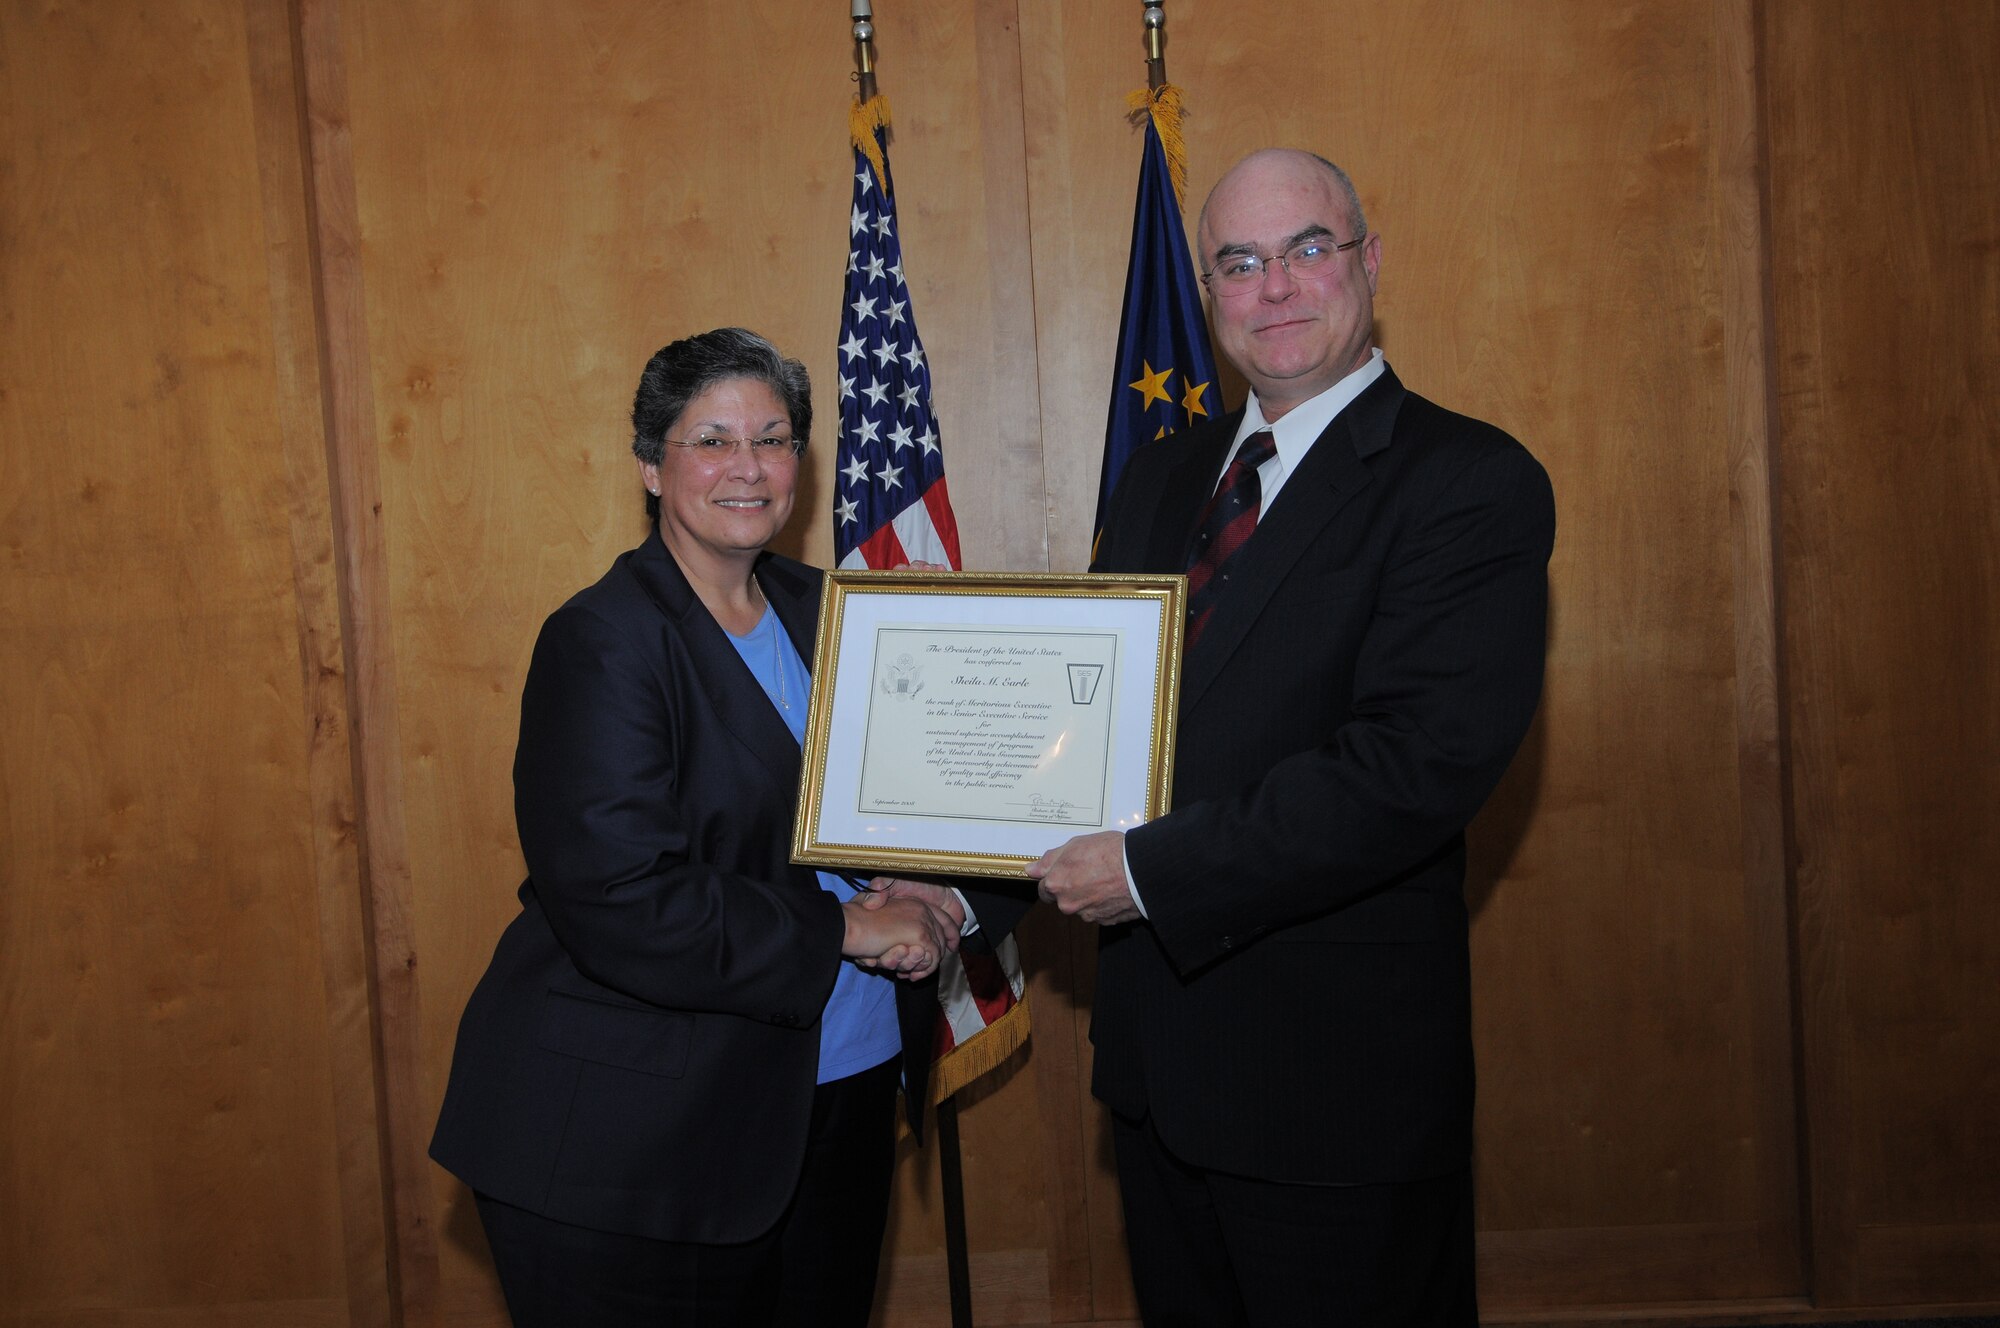 Bill Carr, Office of the Secretary of Defense Military Personnel Policy Office deputy undersecretary, presents the Presidential Rank Award to Sheila Earle, Air Force Personnel Center executive director, during a ceremony Dec. 9. Ms. Earle was conferred the rank of "Meritorious Executive in the Senior Executive Service" for her accomplishments in U.S. Government program management and for her quality and efficiency in service to the public. (U.S. Air Force photo by Melissa Peterson)
